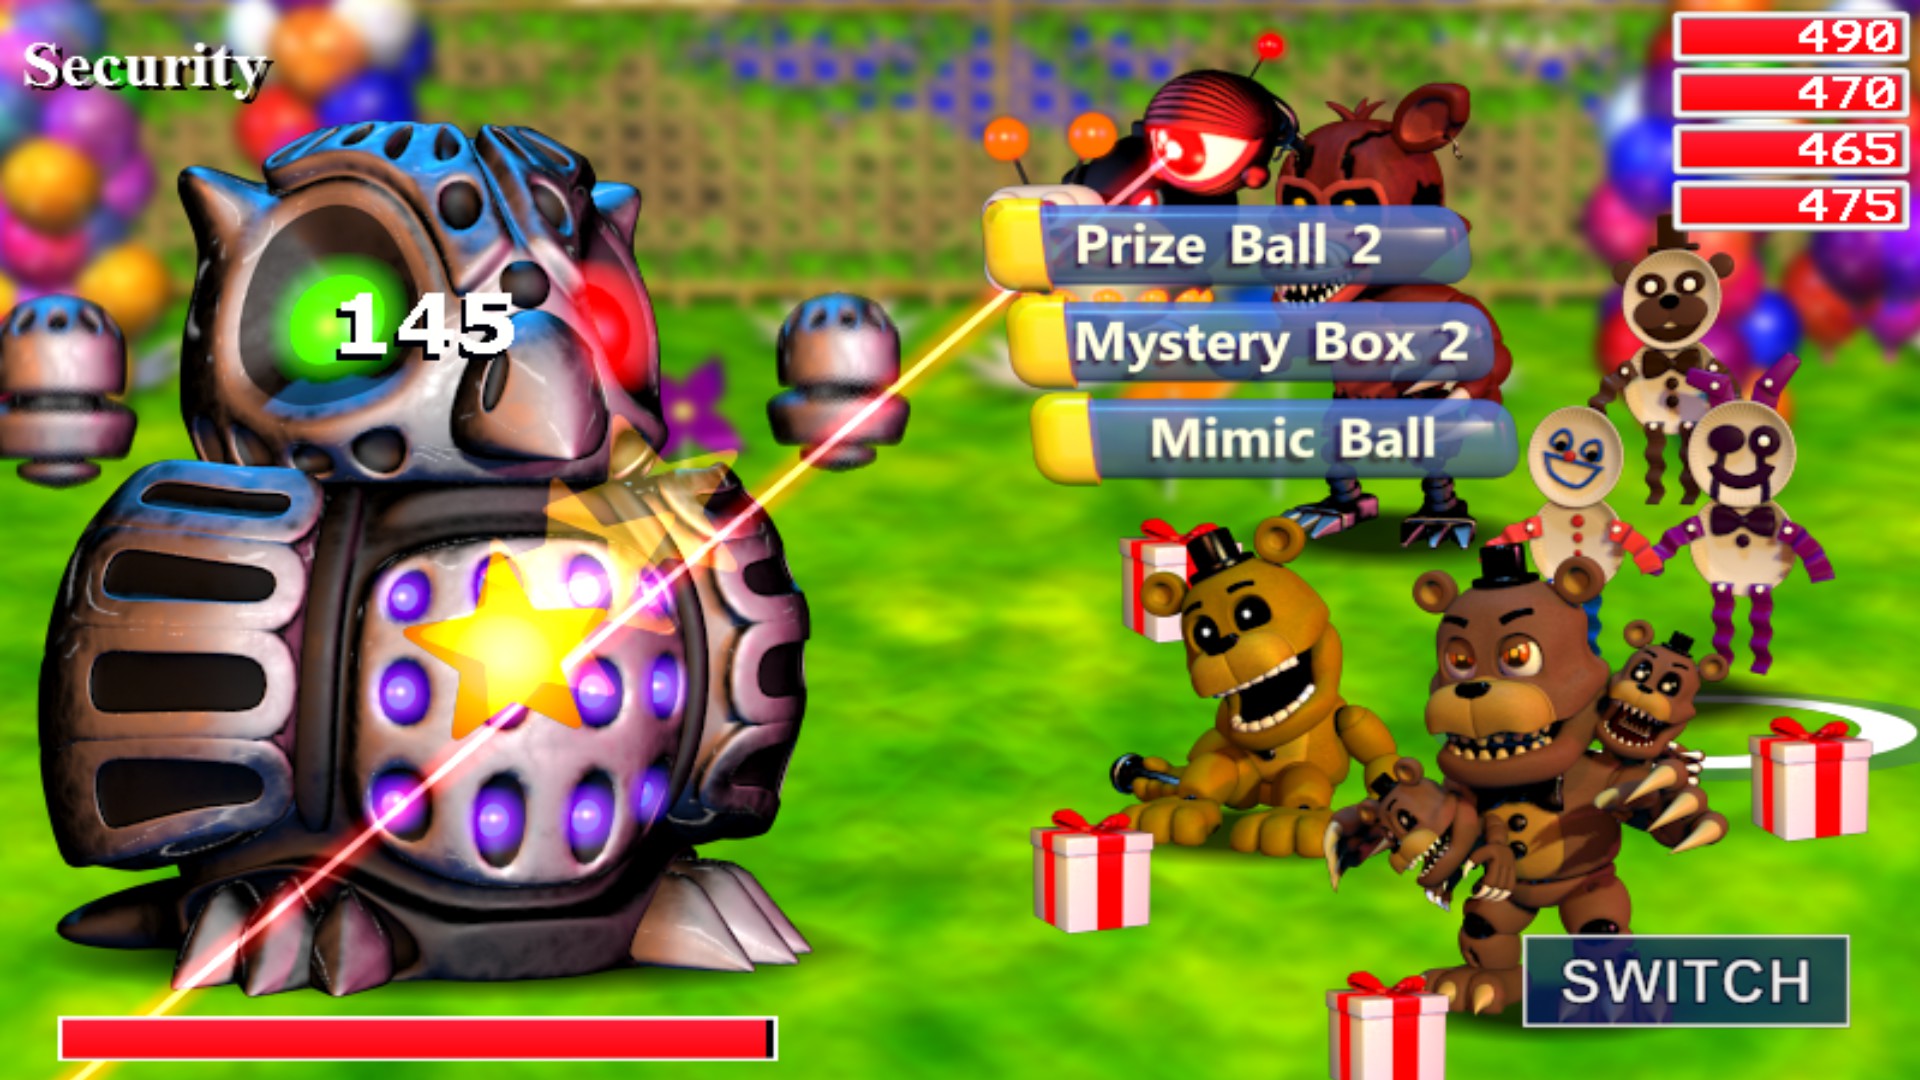 How To Through The Sucurty Lazers In Fnaf World